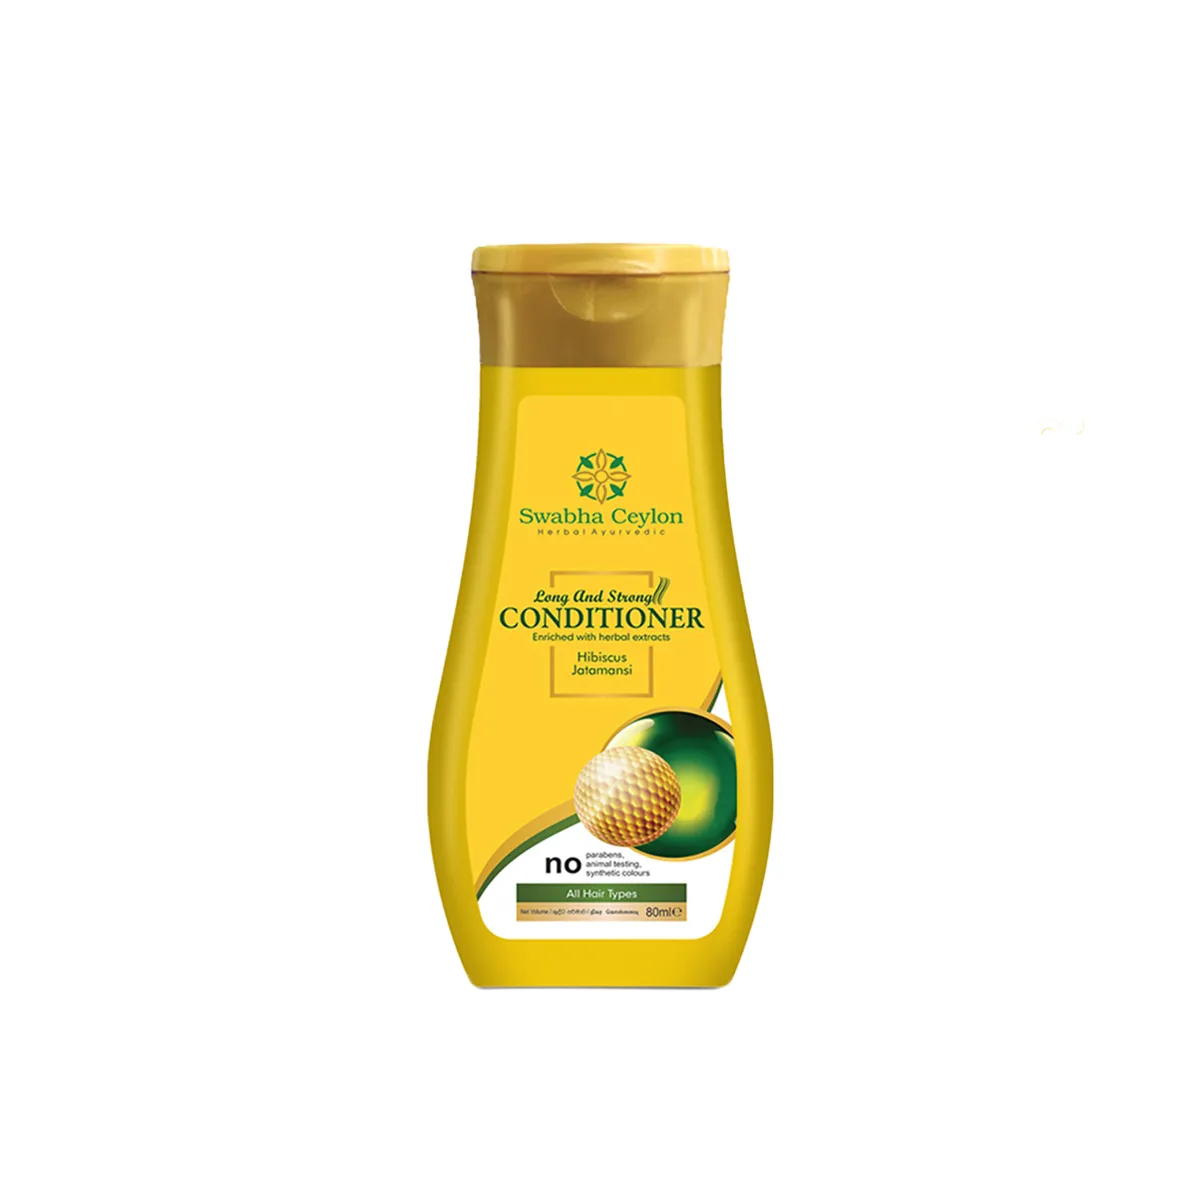 First product image of Swabha Ceylon Long and Strong Conditioner 80ml